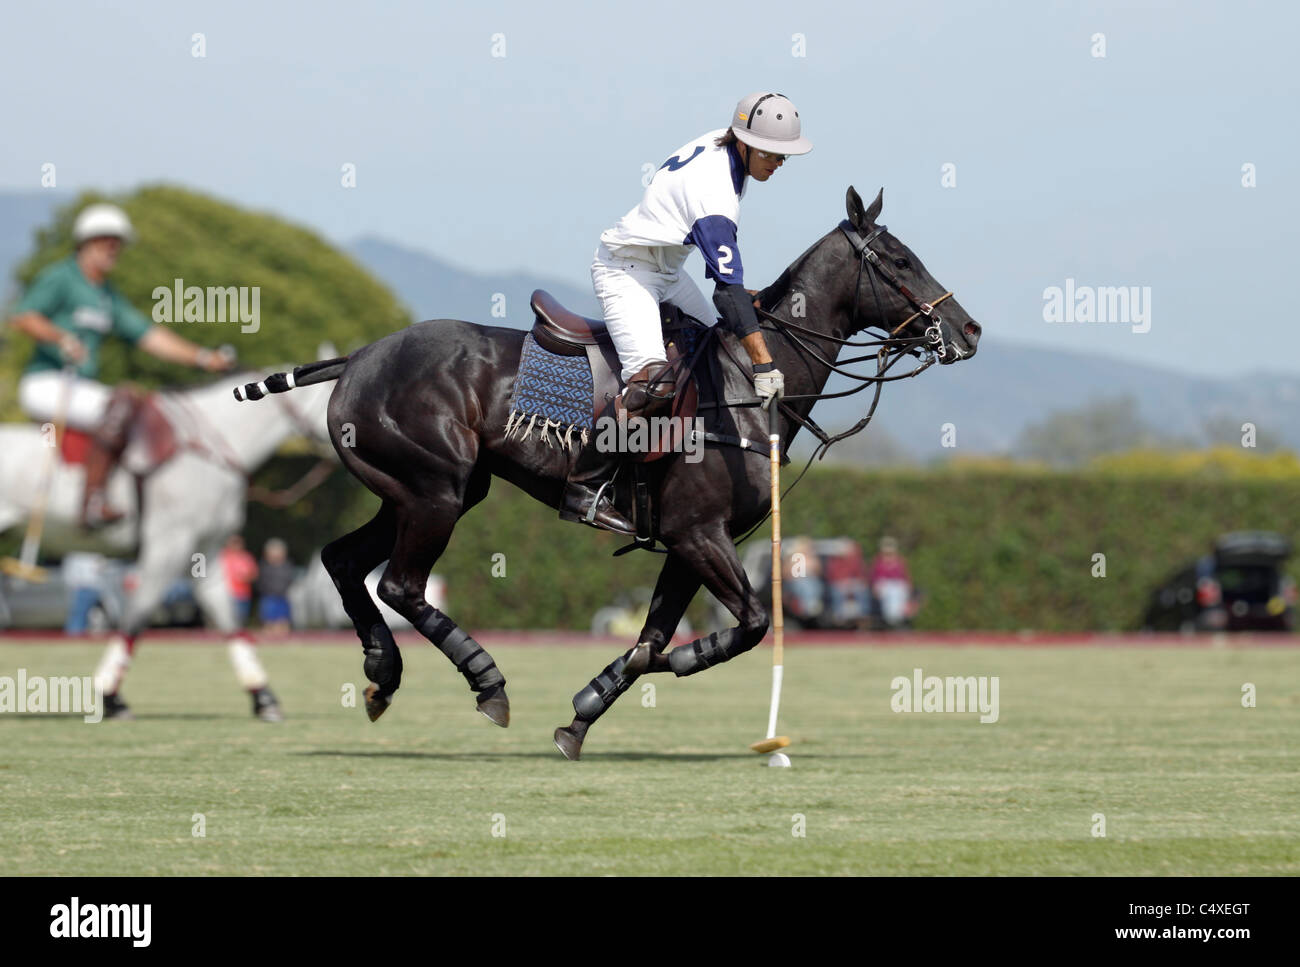 Polo player attempting to score a goal at the Santa Barbara, Polo Club Stock Photo